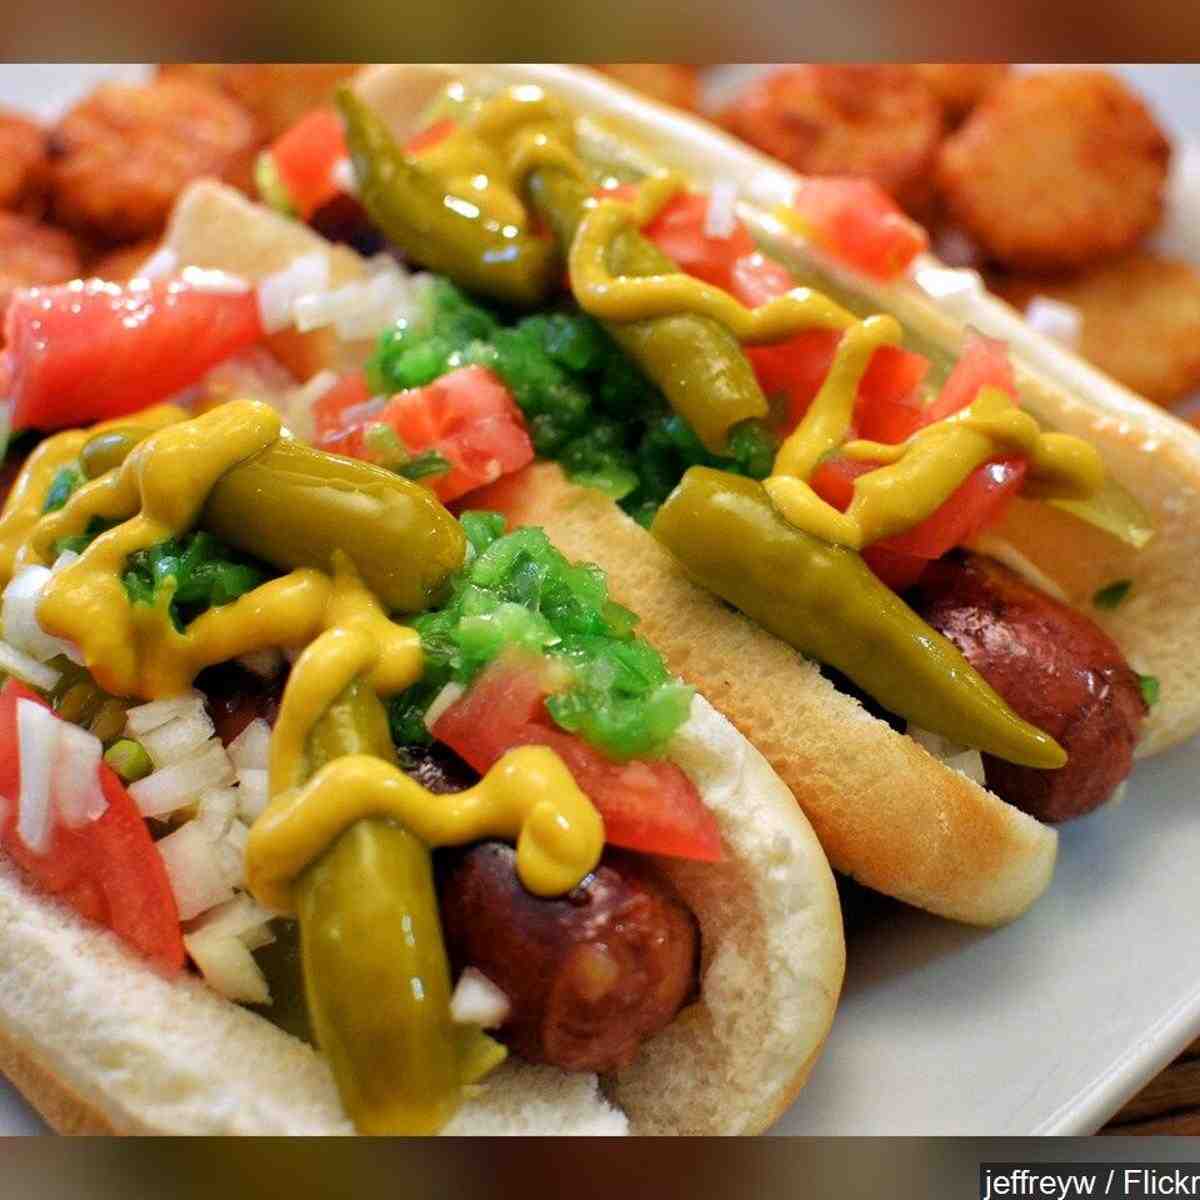 What hot dogs are safe for dogs?